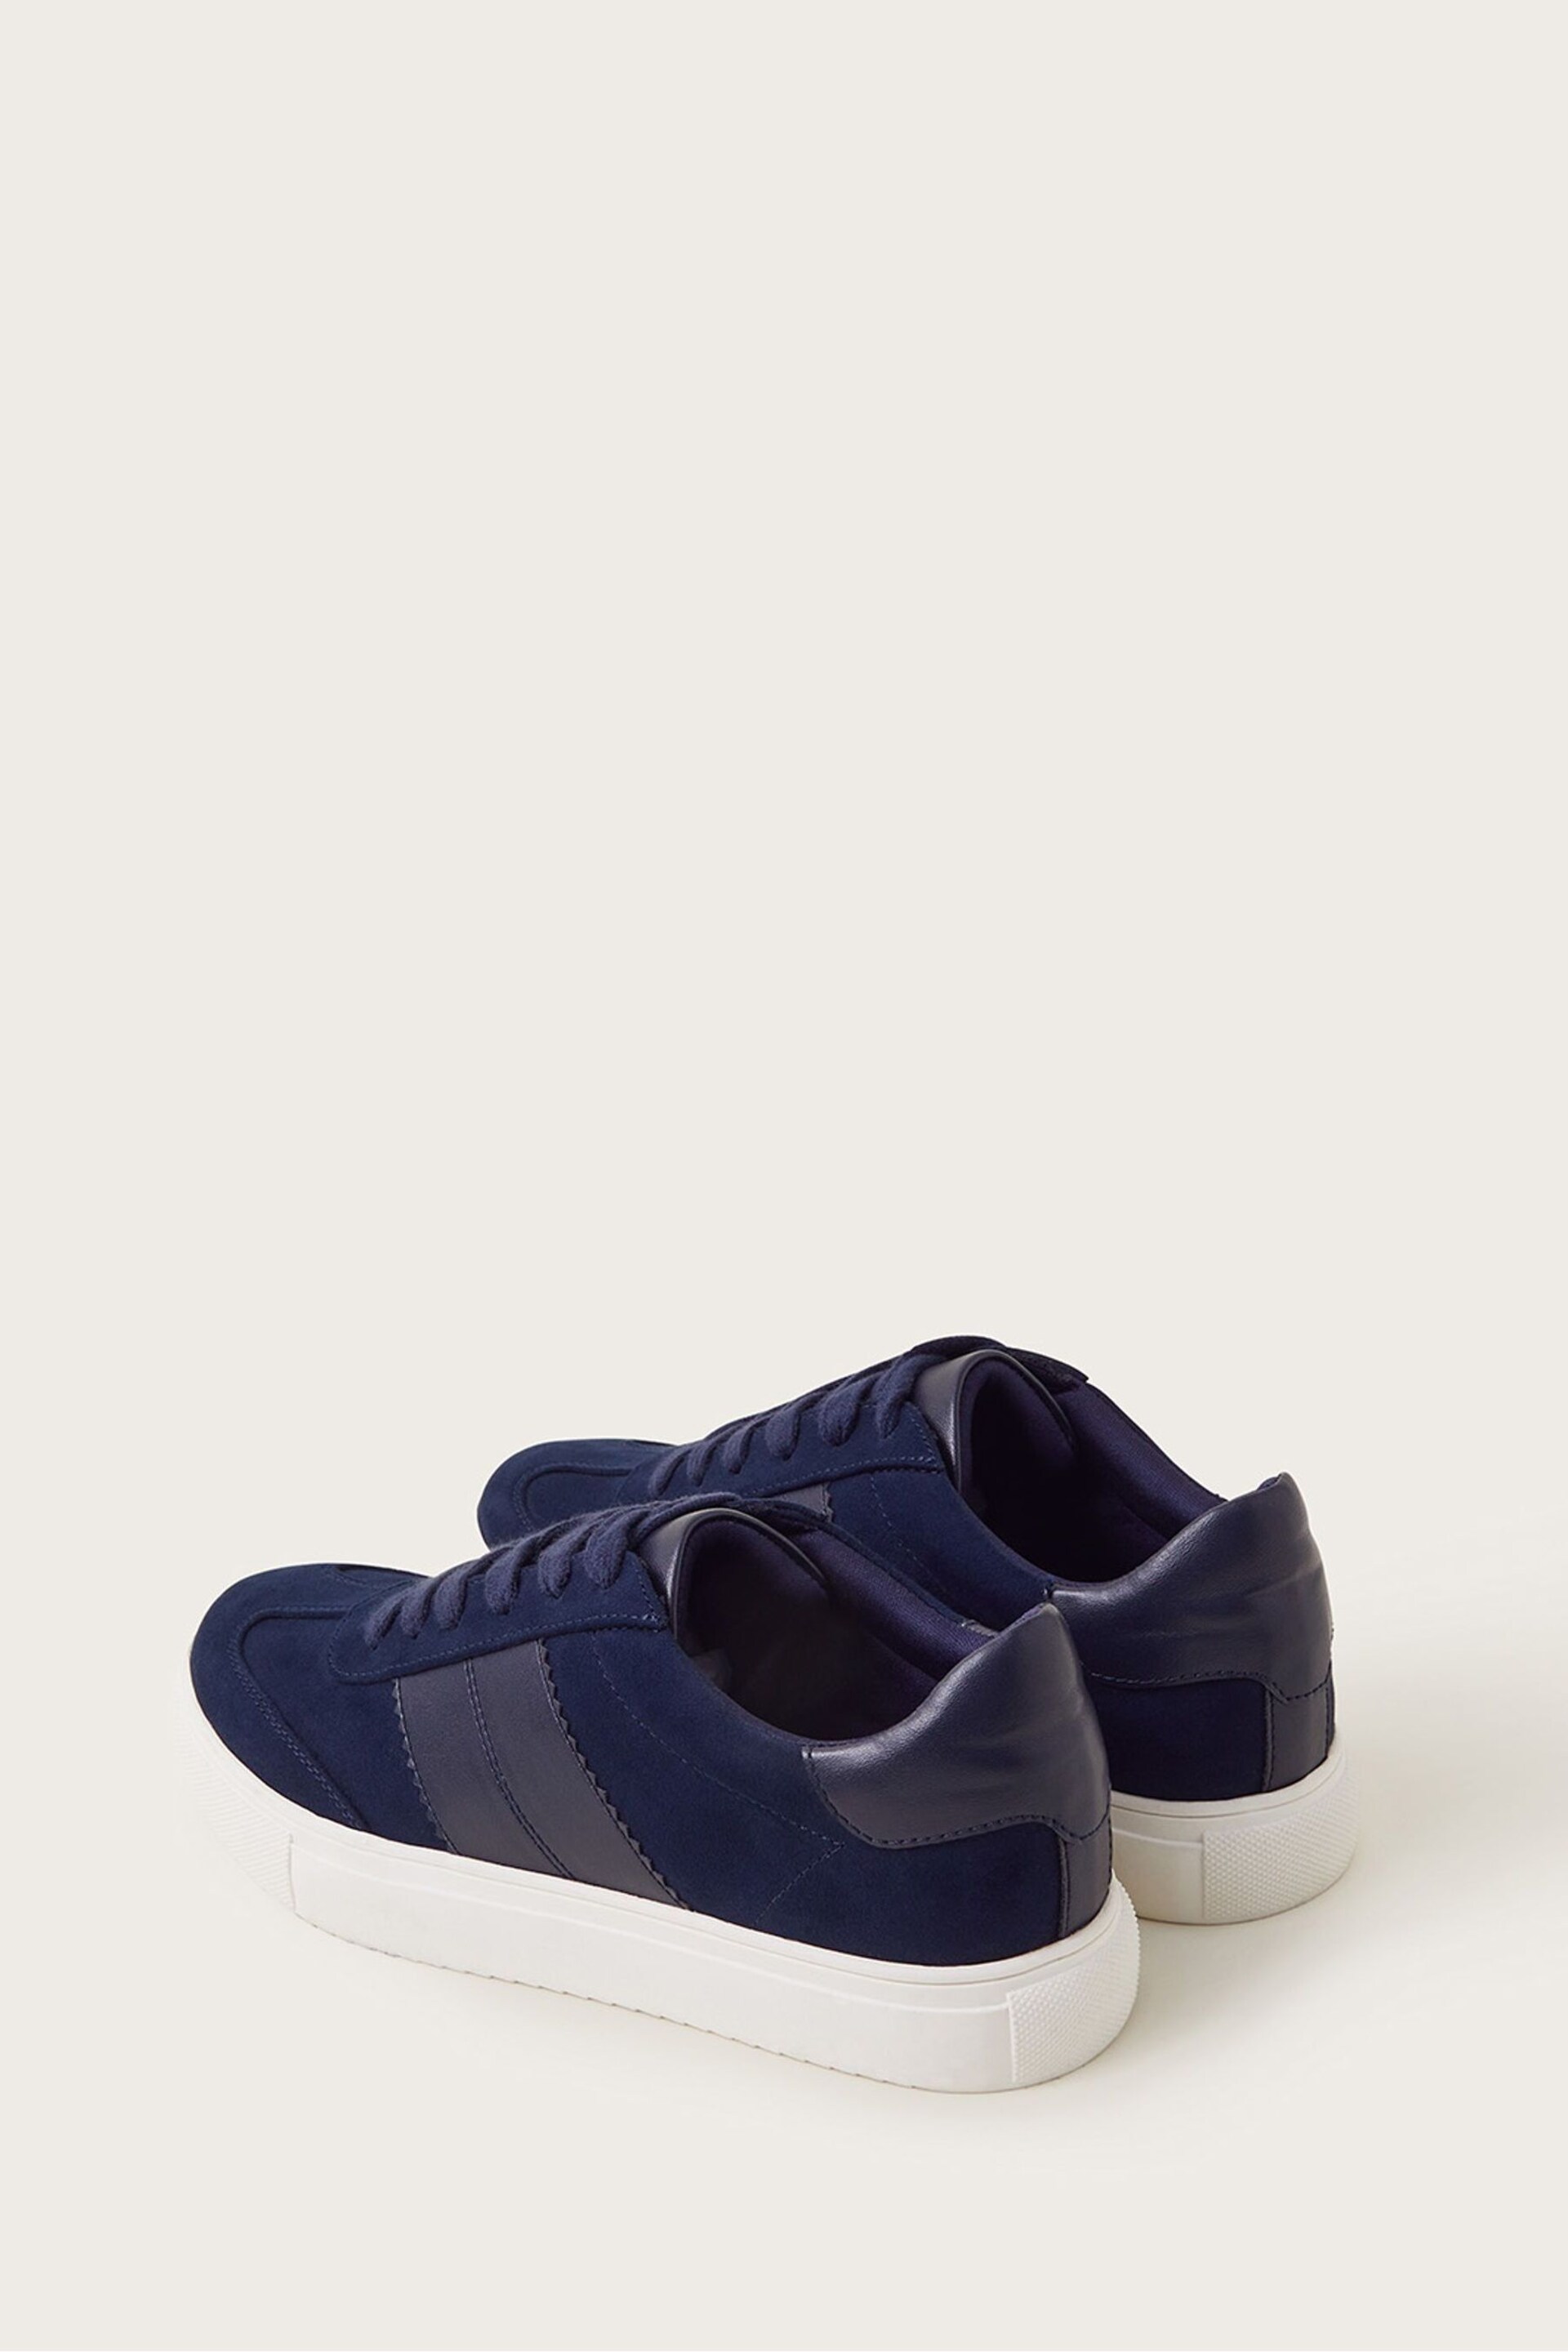 Monsoon Blue Faux Suede Trainers - Image 3 of 3